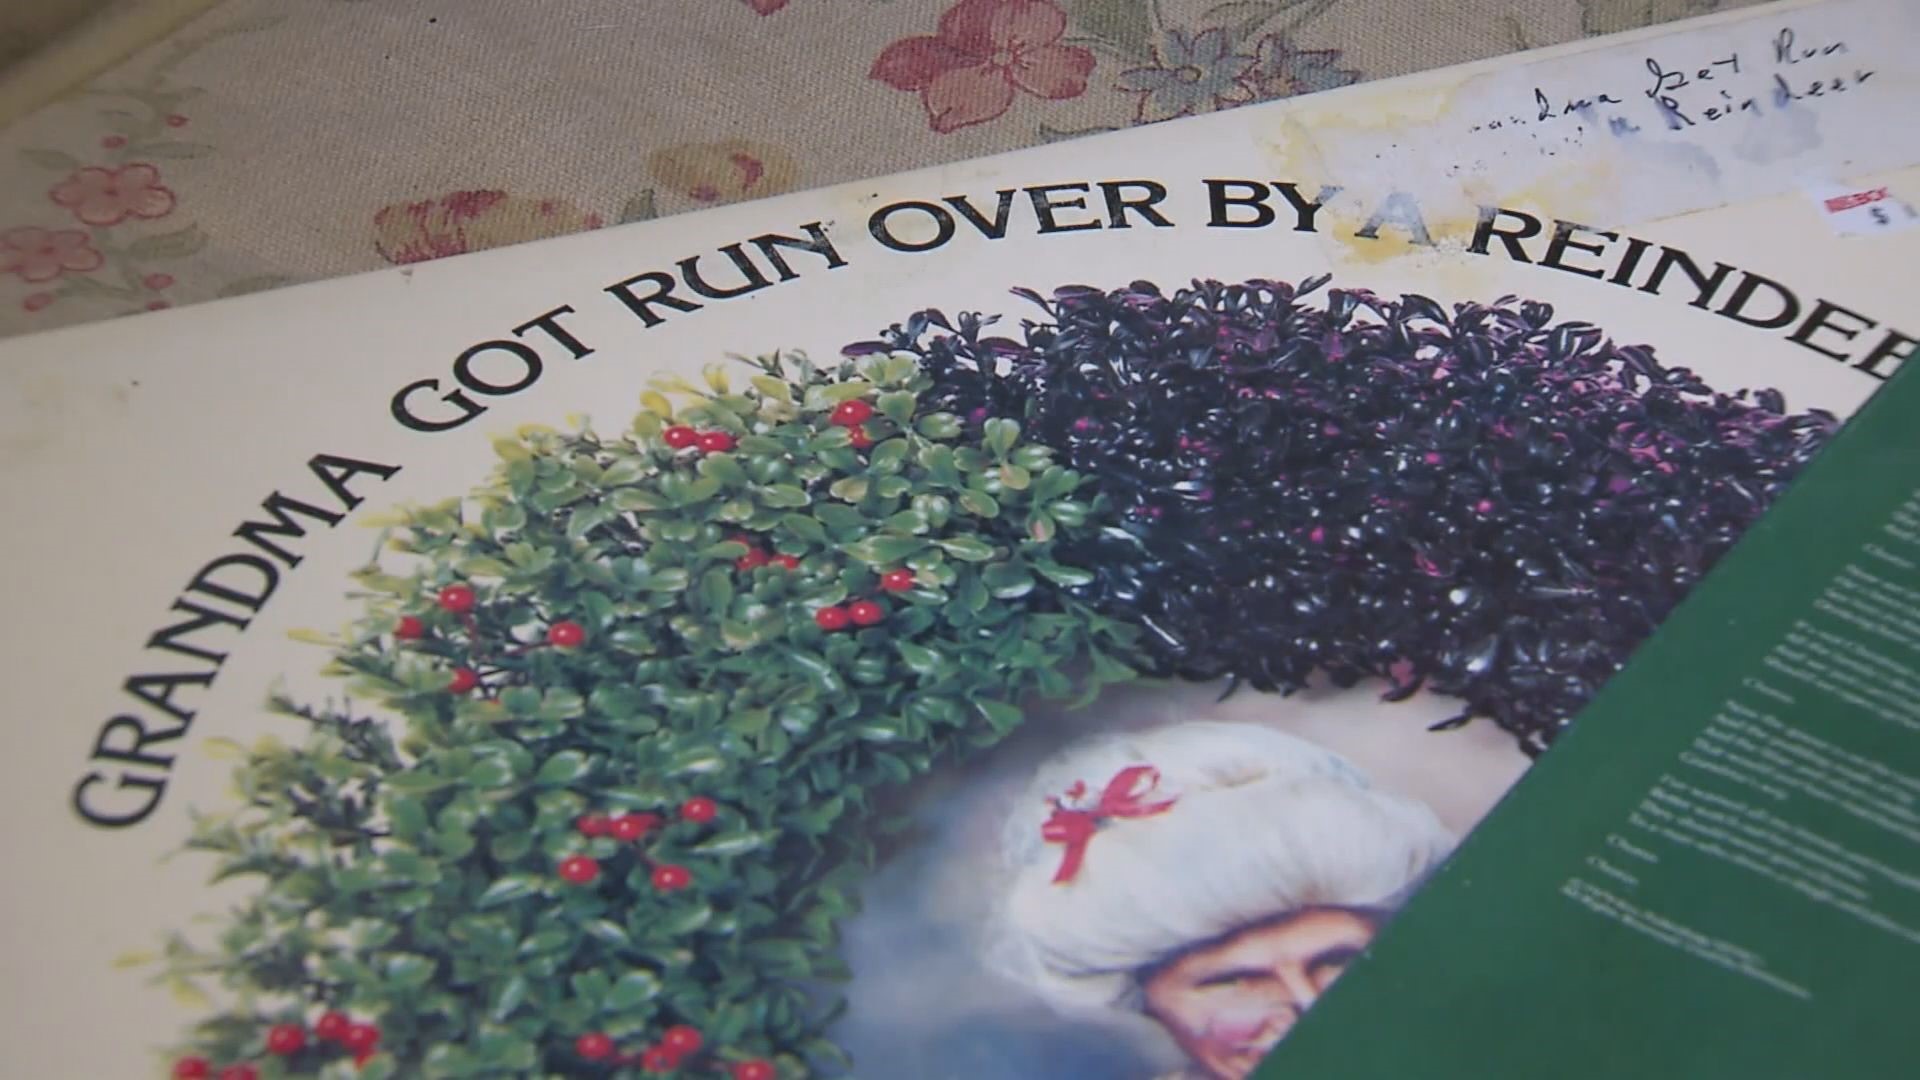 WTOL 11 spoke with three experts to determine criminal liability, civil liability and insurance issues in the song, "Grandma Got Run Over By a Reindeer."